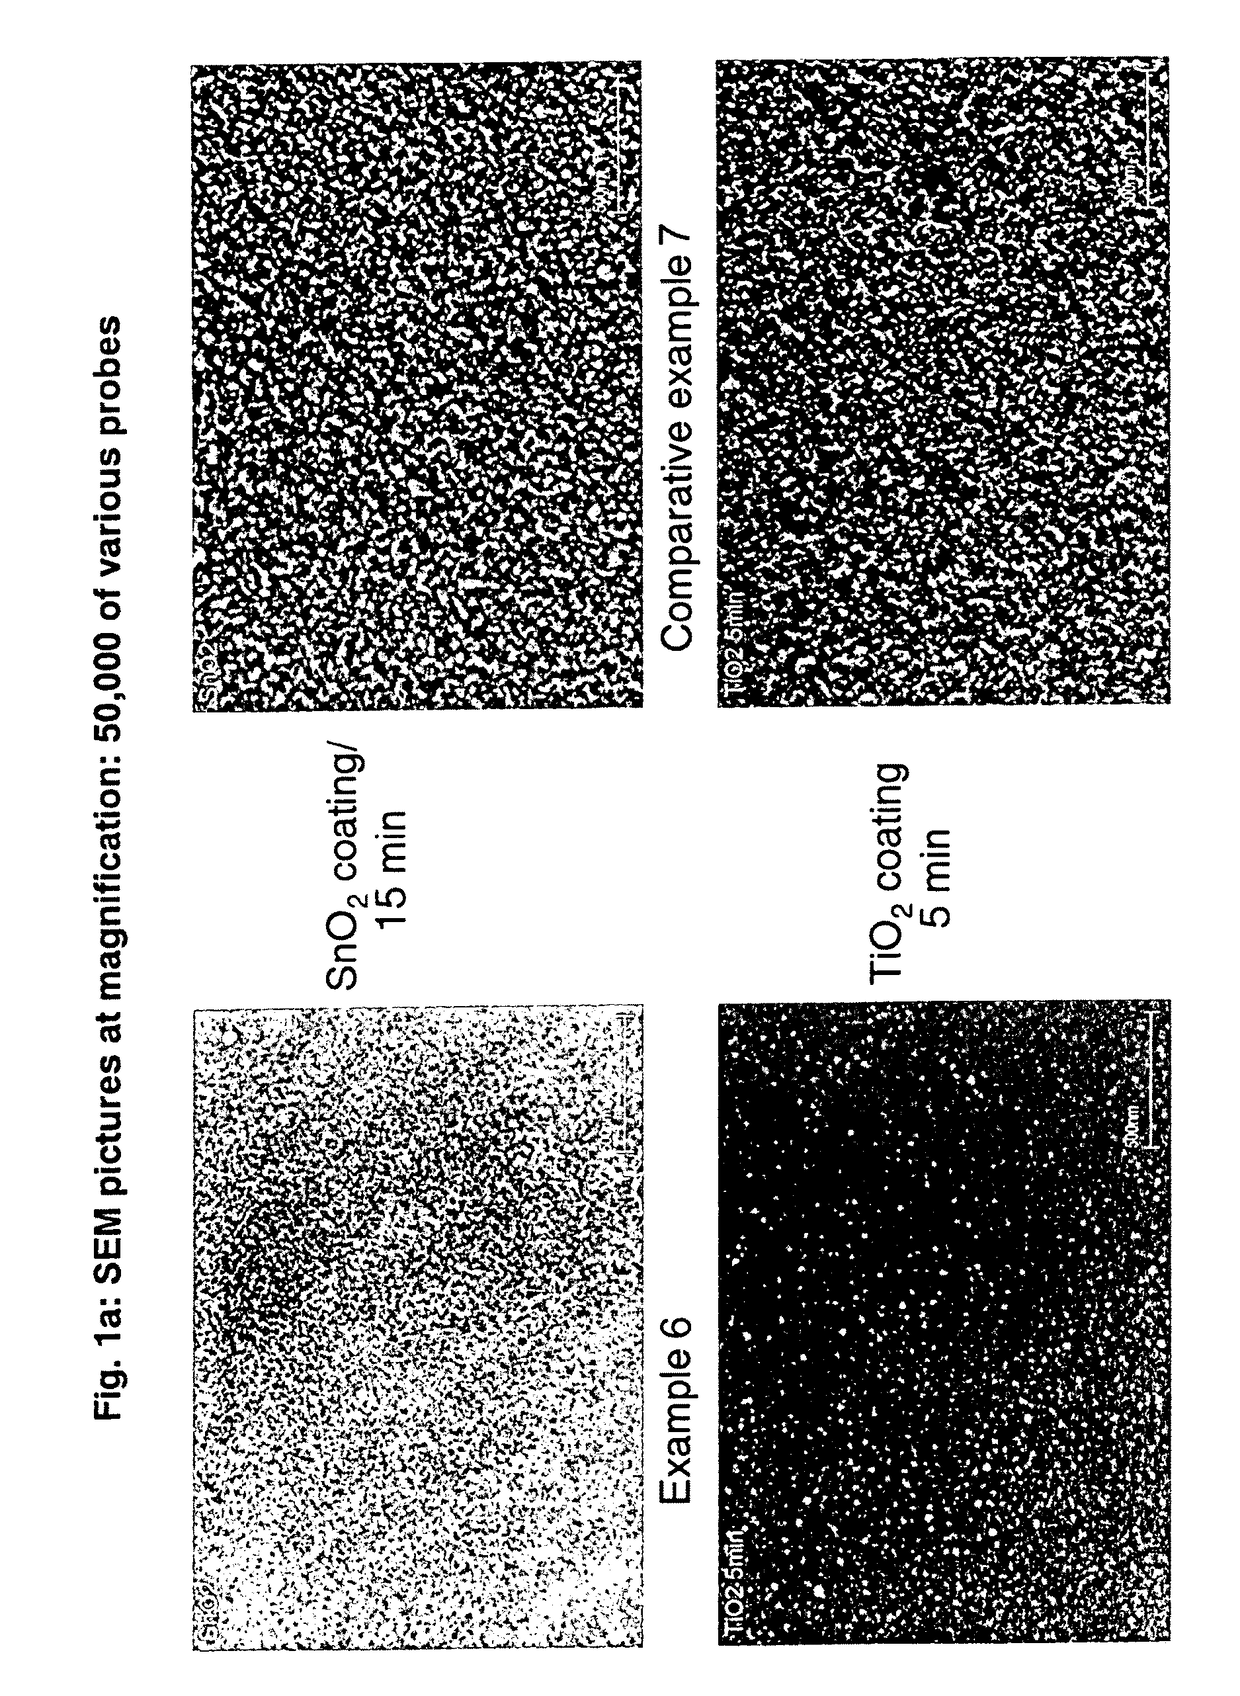 Effect pigments comprising a glass flake substrate